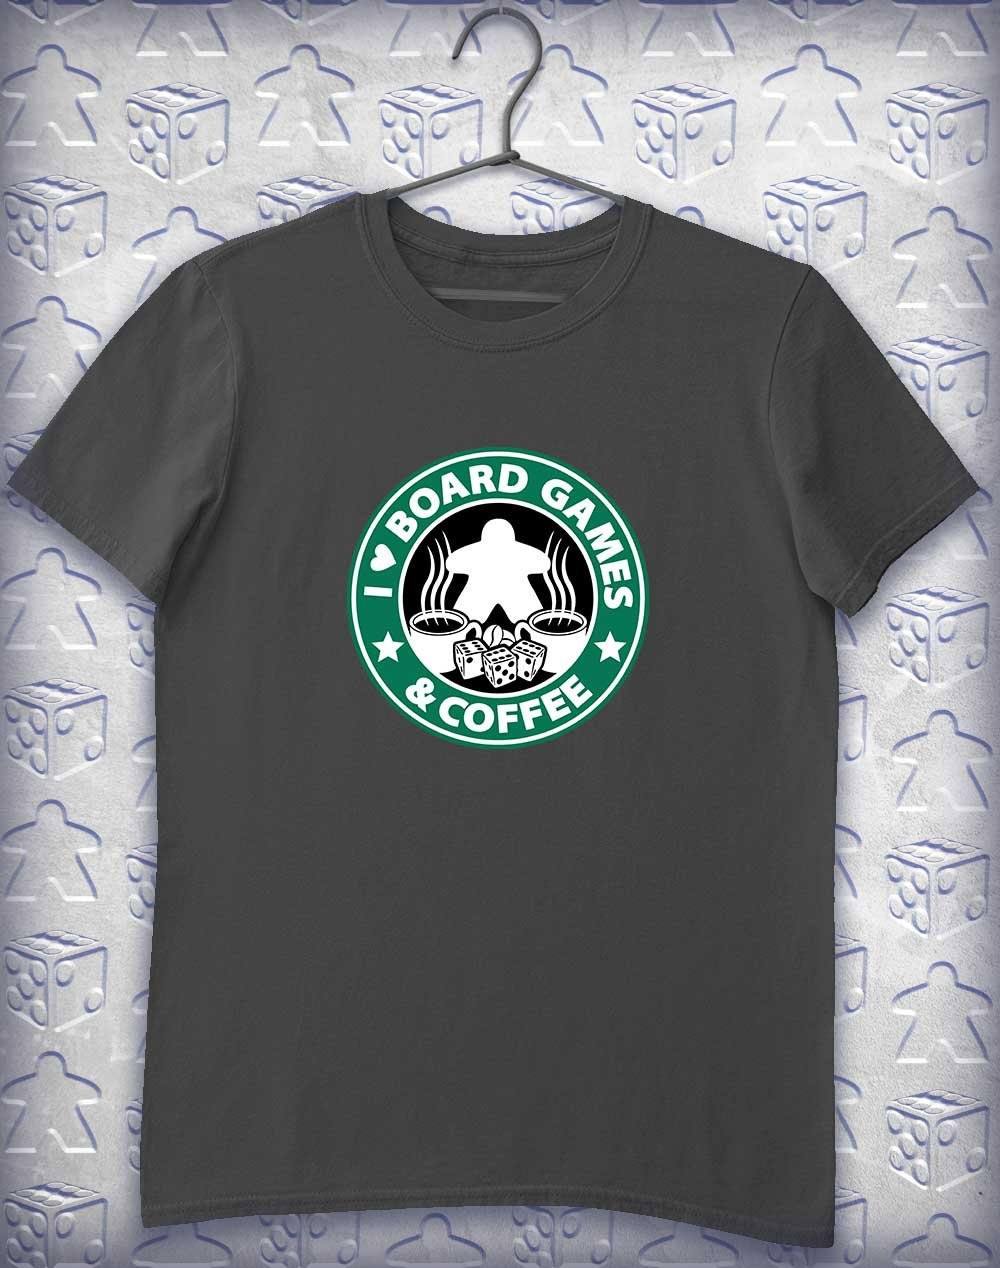 Board Games & Coffee Alphagamer T Shirt S / Charcoal  - Off World Tees